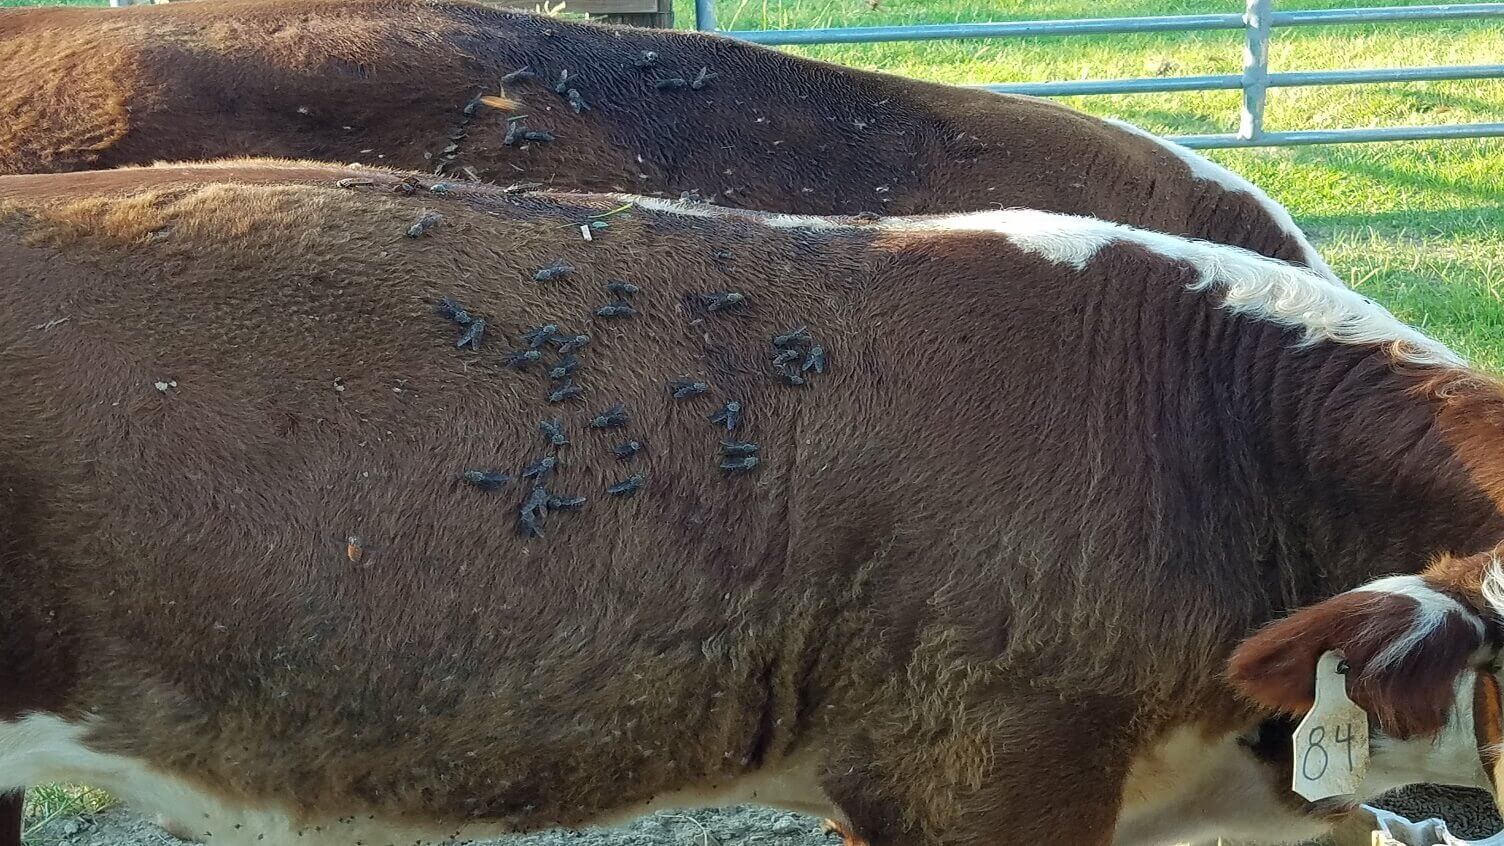 Female horse flies, also known as tabanids, cover the side of cattle in a field.